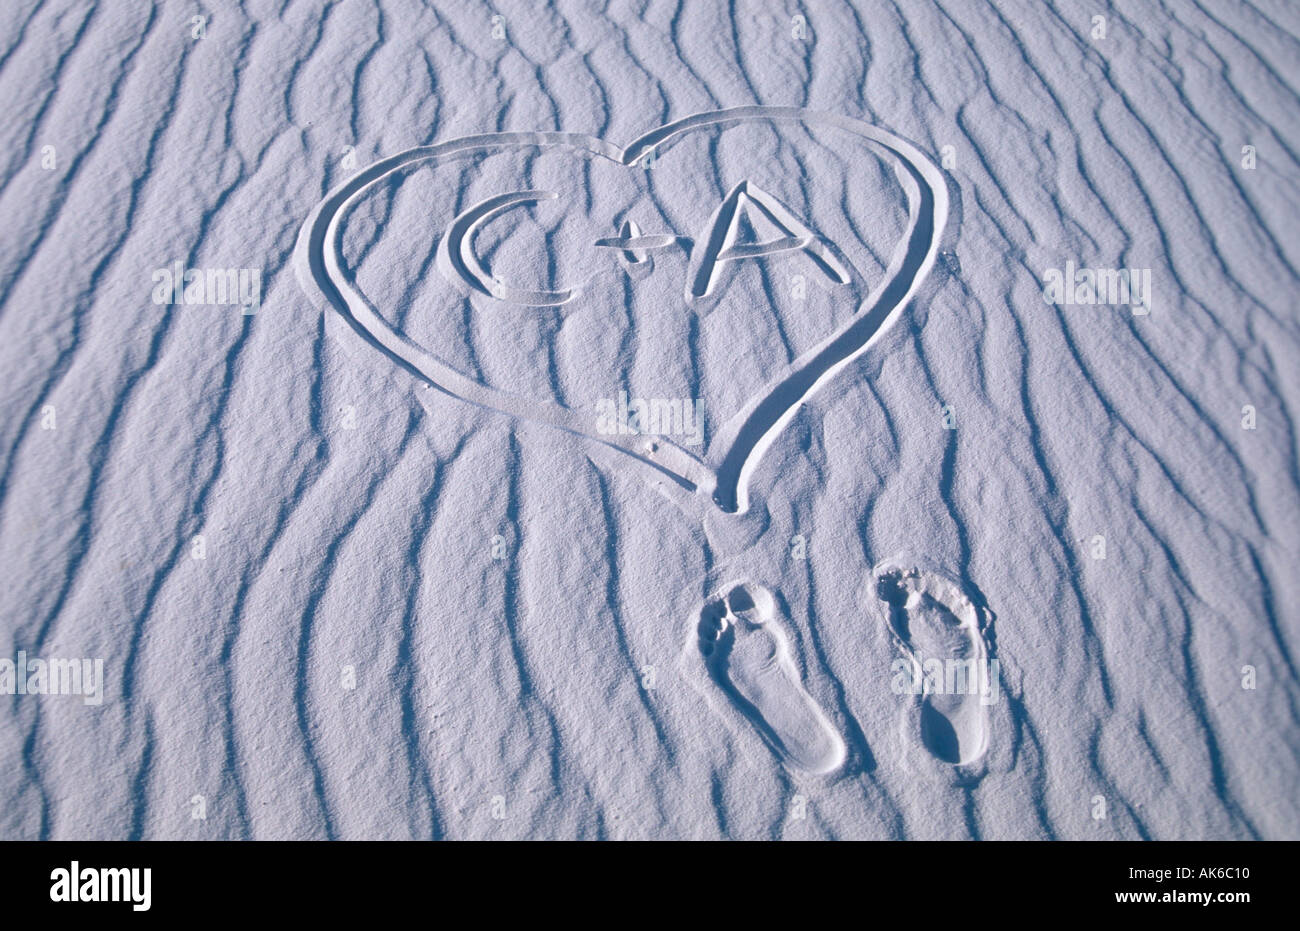 Foot prints and heart with letters in sand structures White Sands national monument New Mexico USA Fussabdruecke und Herz mit Stock Photo